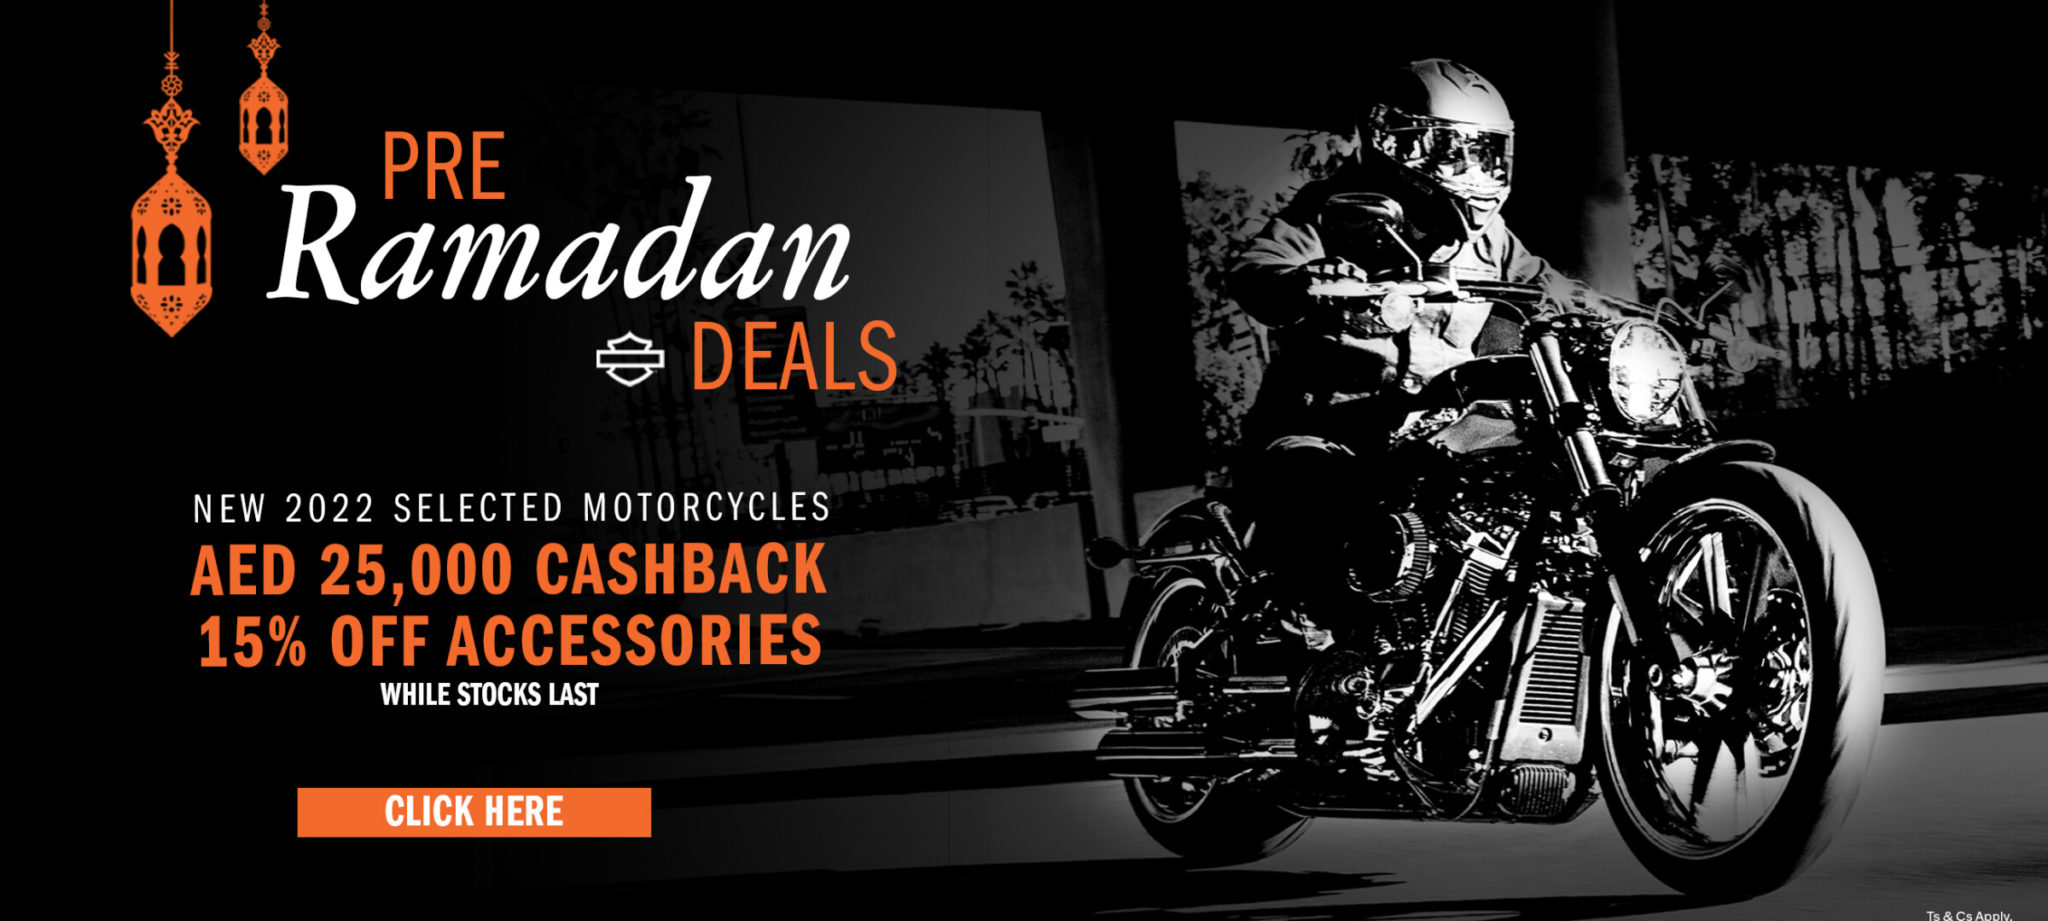 Harley-Davidson UAE Offers Up To AED 25,000 Discount